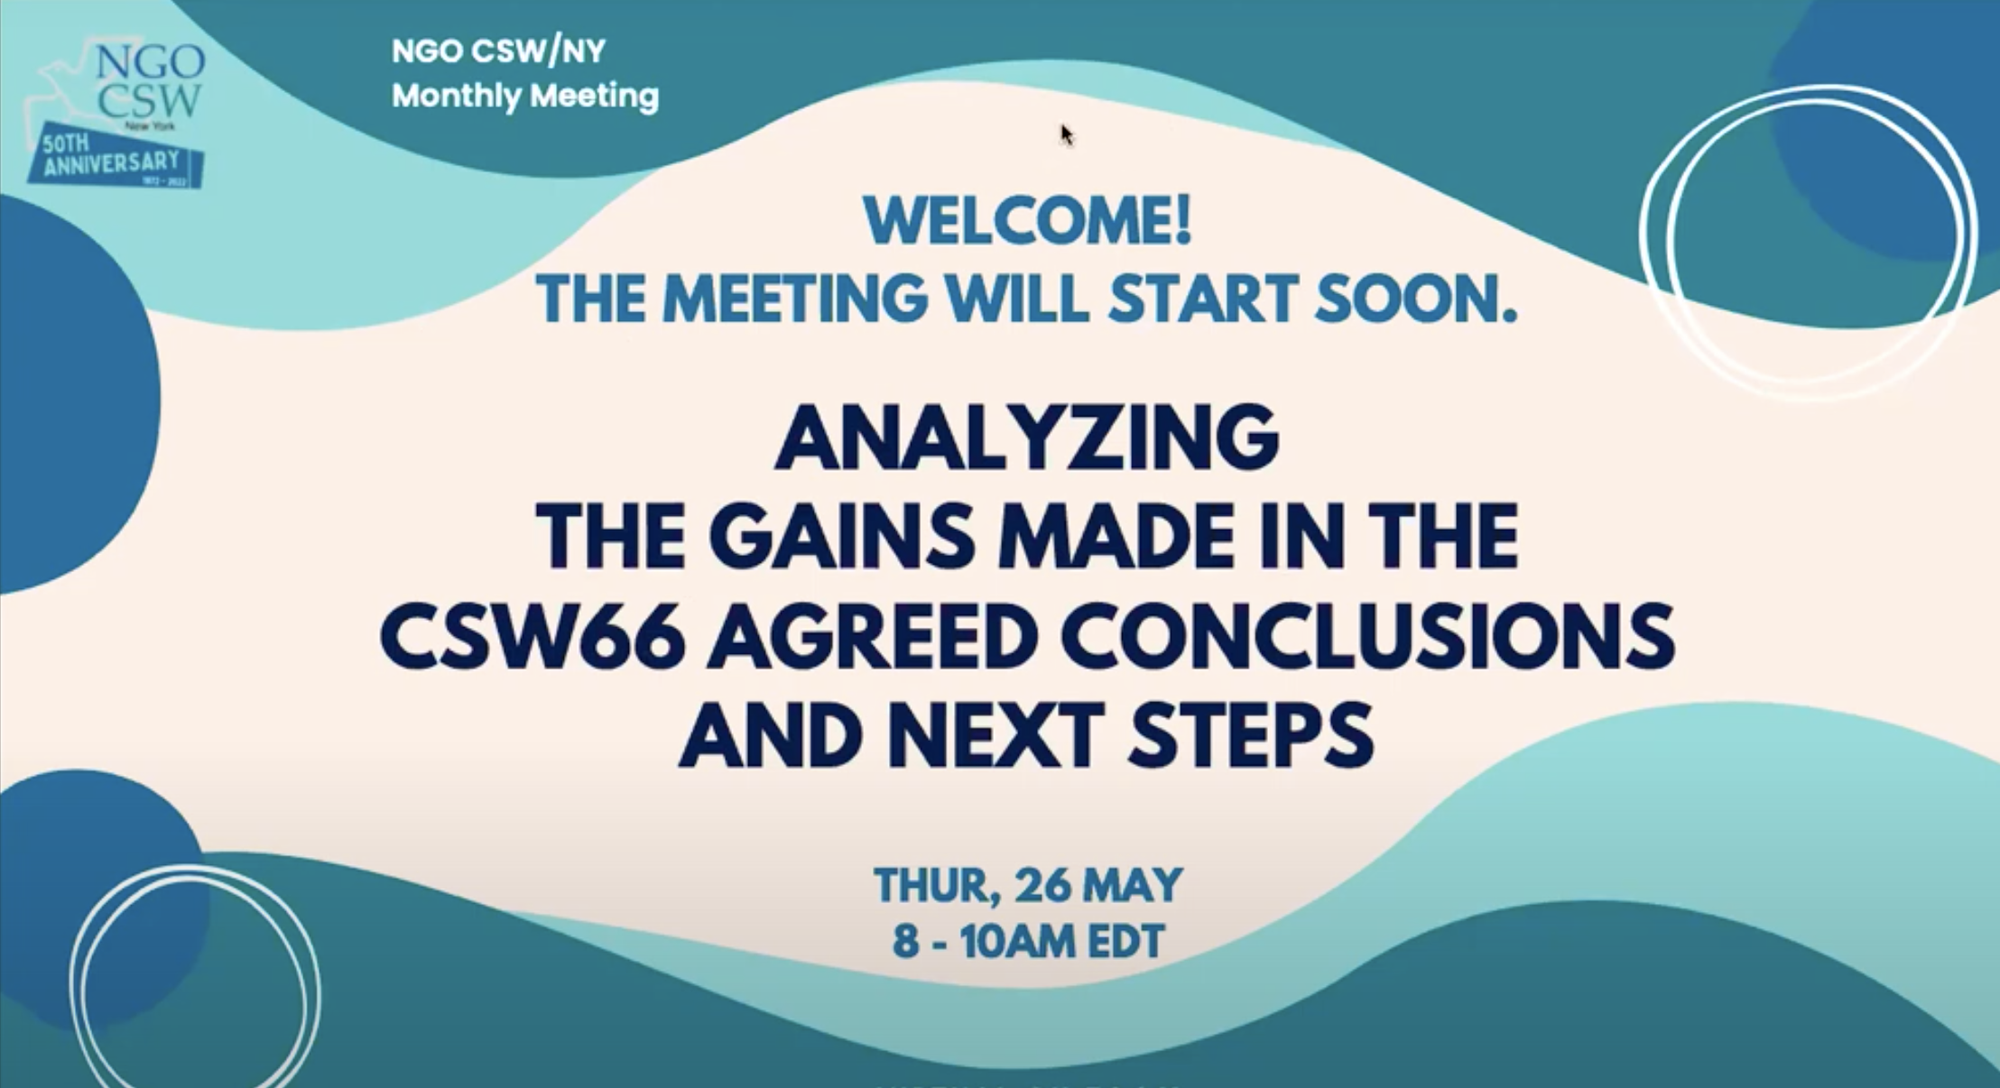 NGO CSW NY - Analyzing the Gains Made in the CSW66 Agreed Conclusions